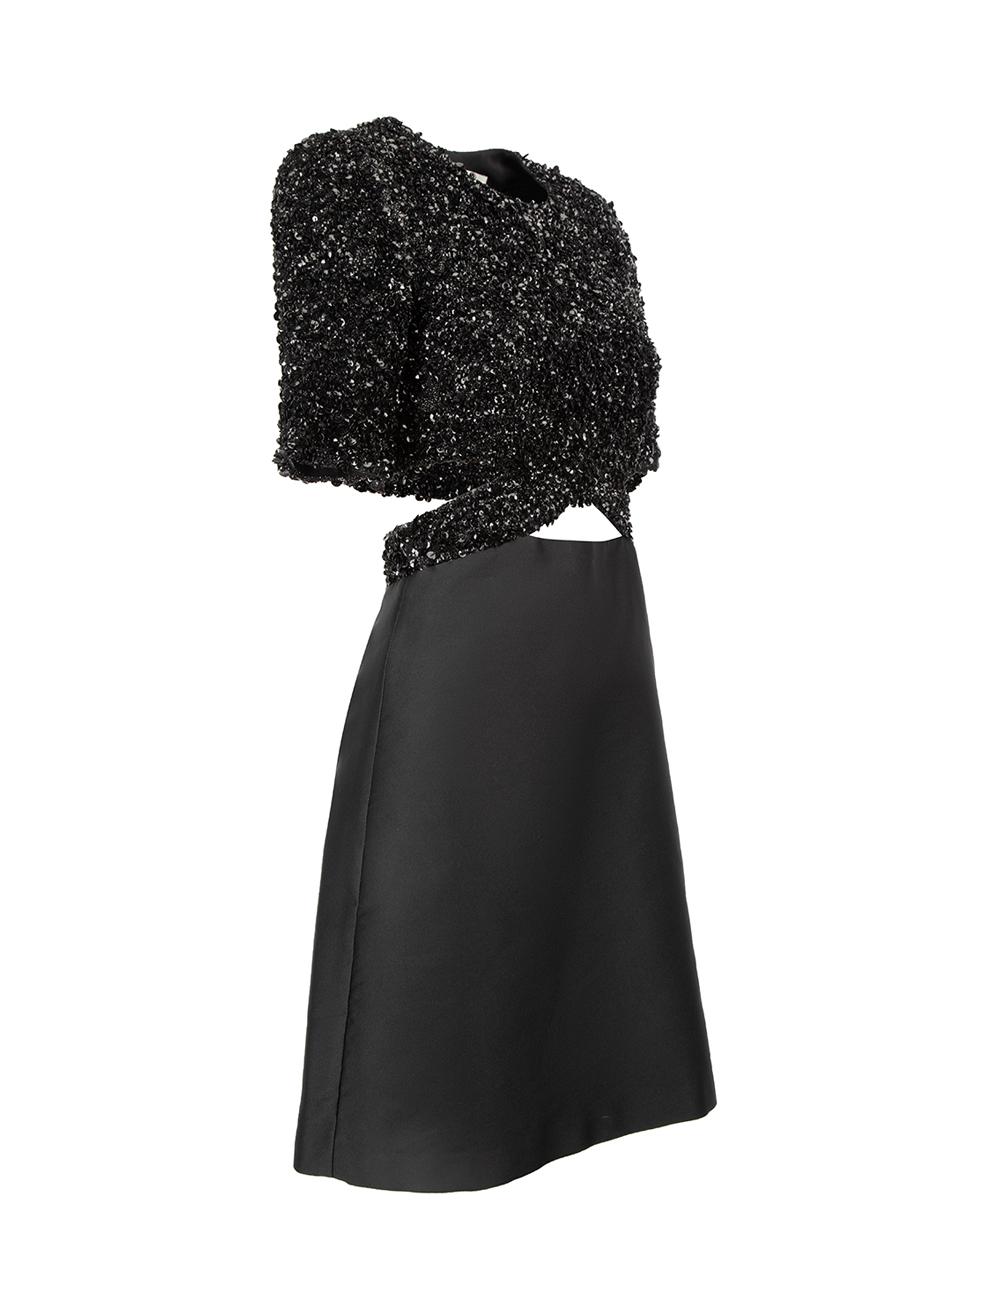 CONDITION is Very good. Minimal wear to dress is evident. Minimal wear to the sequinned panels with loose threads and missing sequins on this used 3.1 Phillip Lim designer resale item. 



Details


Black

Synthetic

Mini dress

Embellished